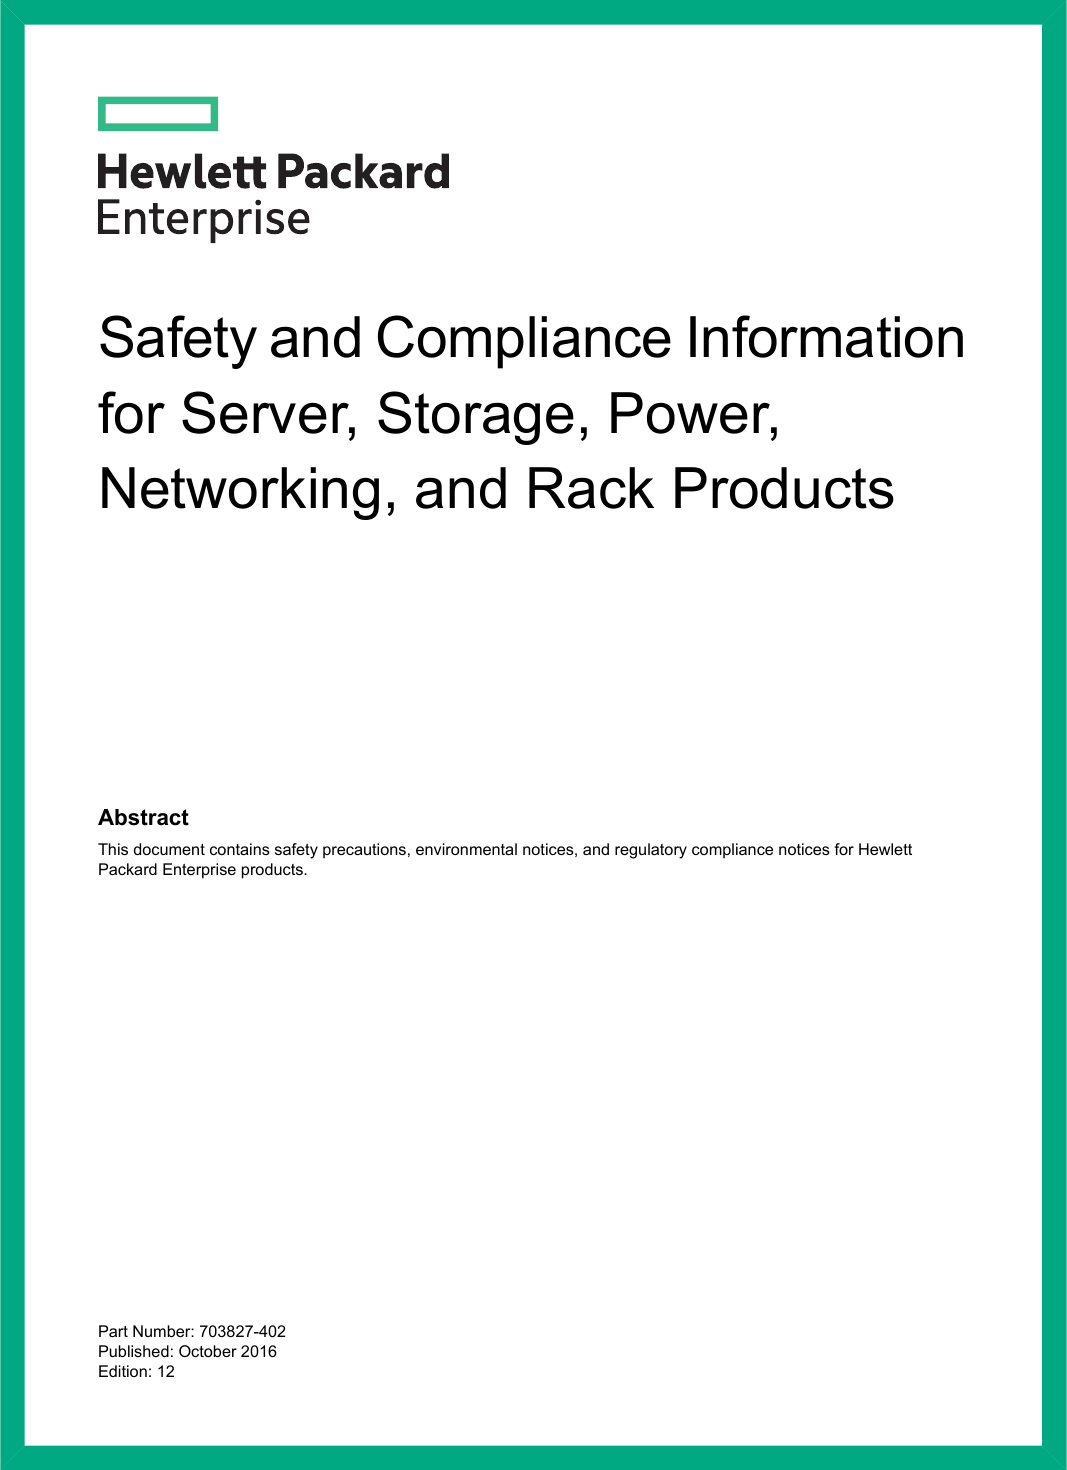 Safety and Compliance Informationfor Server, Storage, Power,Networking, and Rack ProductsAbstractThis document contains safety precautions, environmental notices, and regulatory compliance notices for HewlettPackard Enterprise products.Part Number: 703827-402Published: October 2016Edition: 12